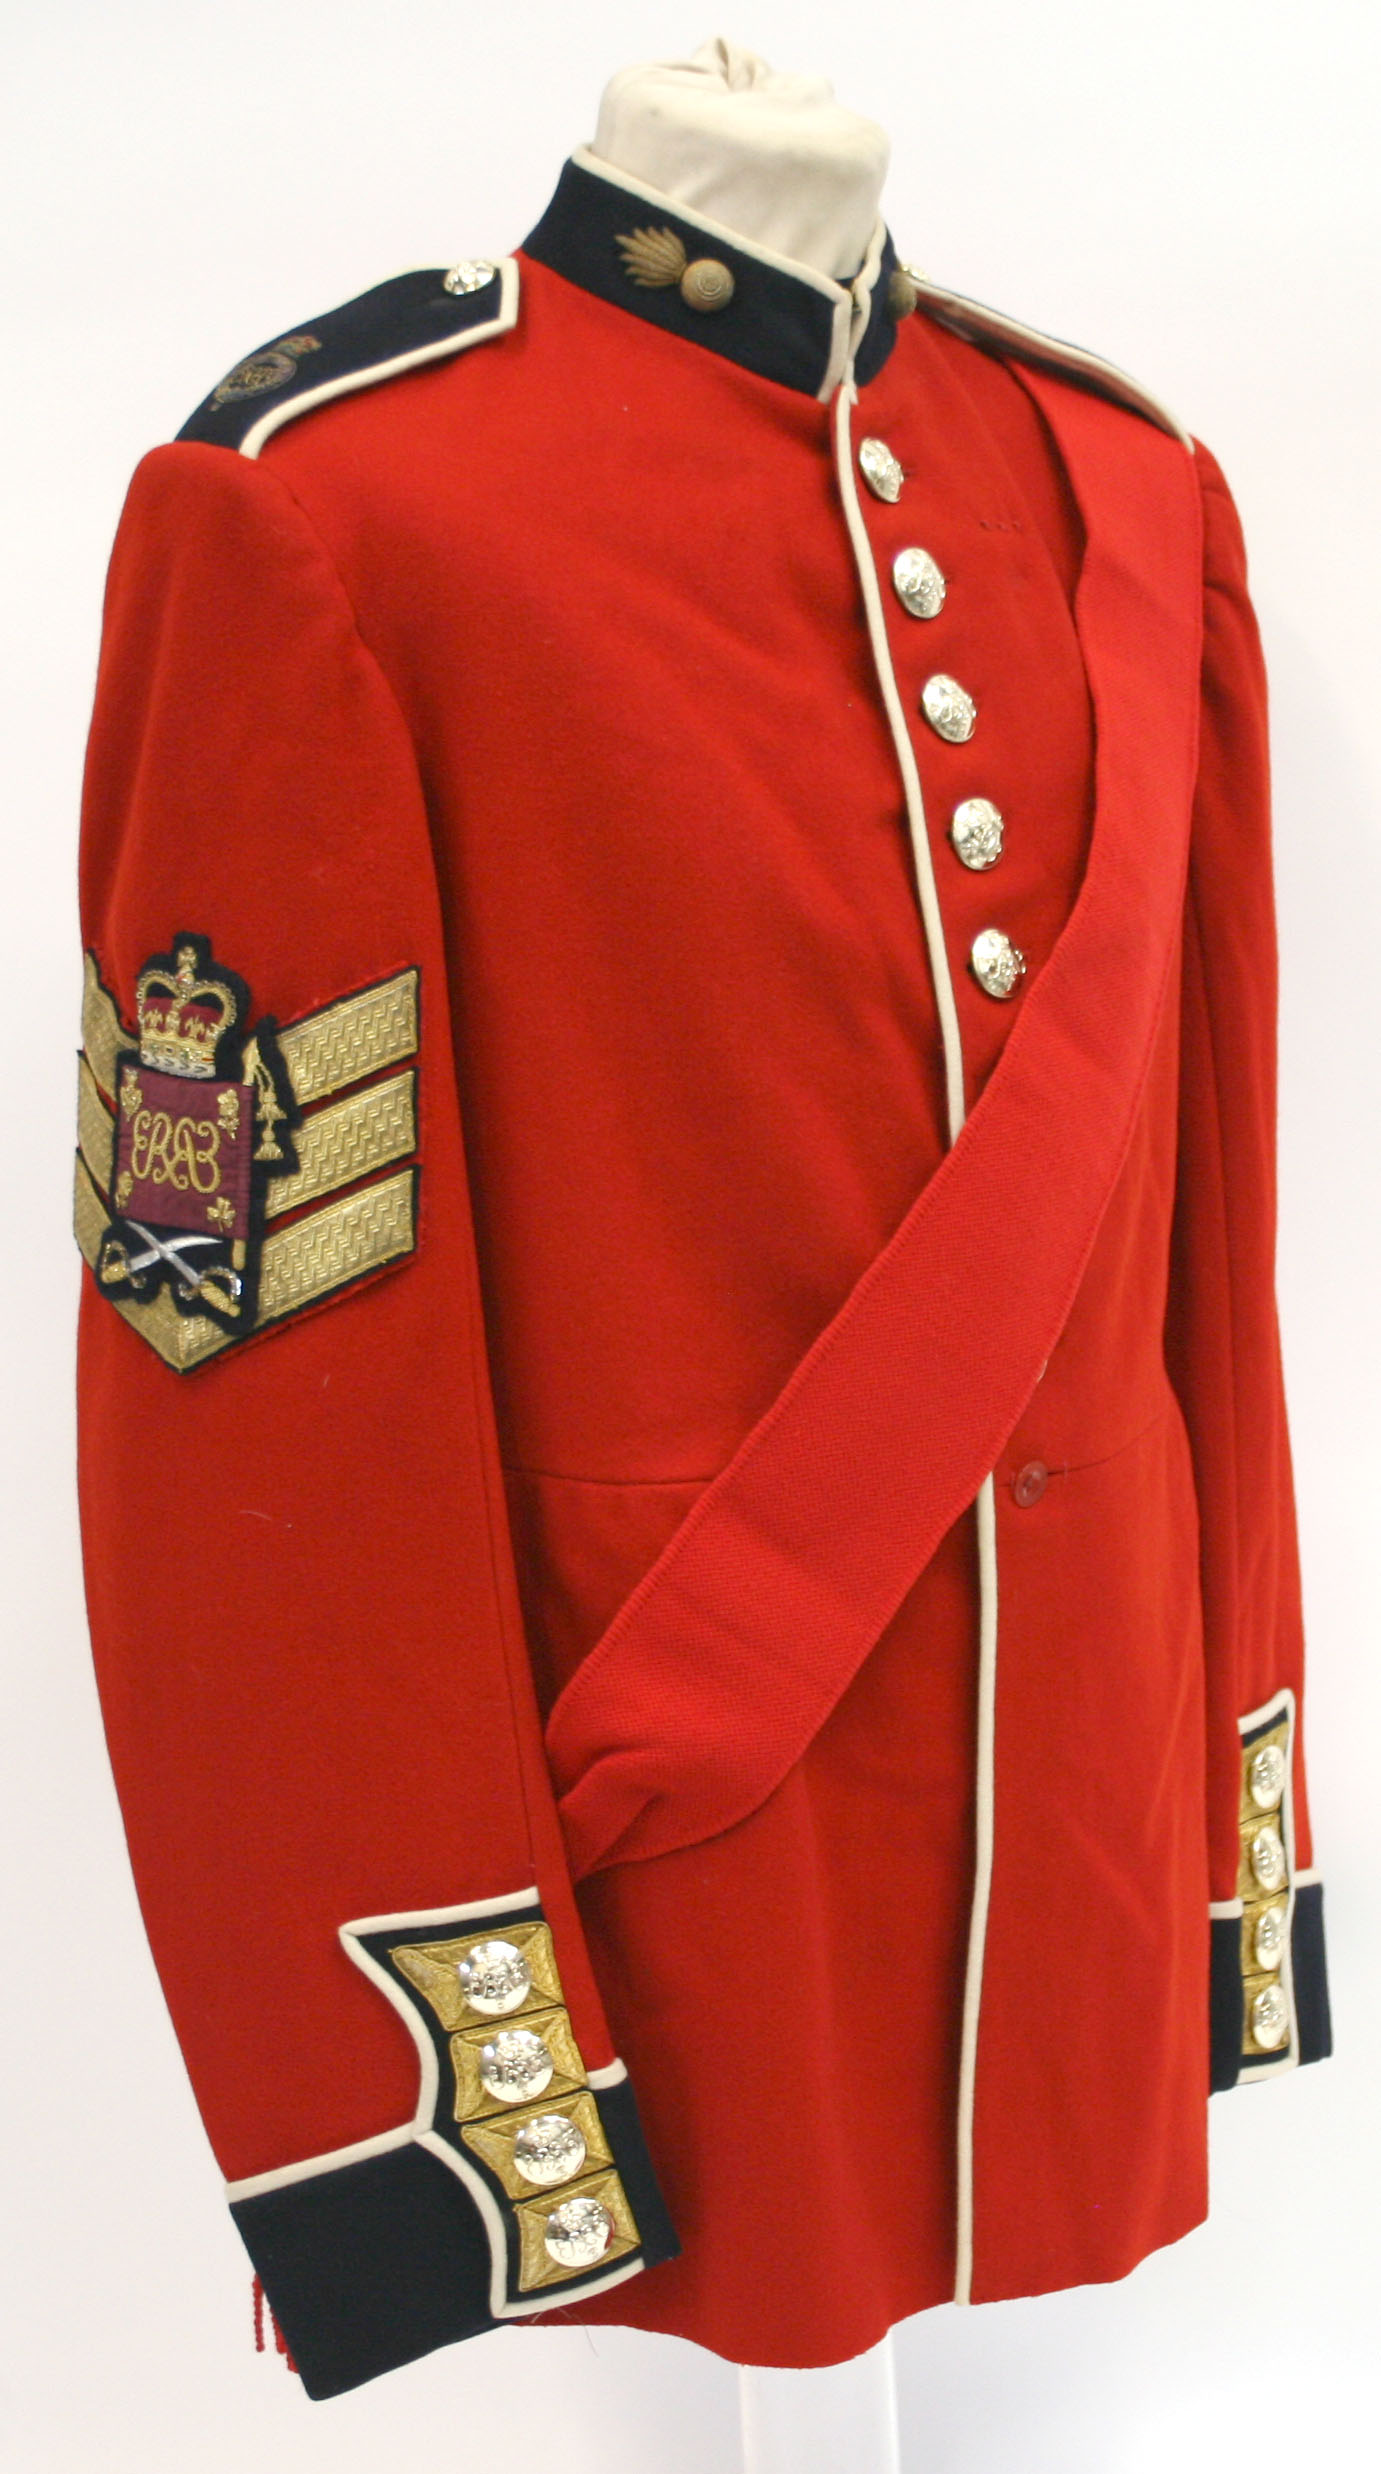 Post 1953 Grenadier Guards Colour Sergeants Dress Tunic of fine red cloth with staybright regimental